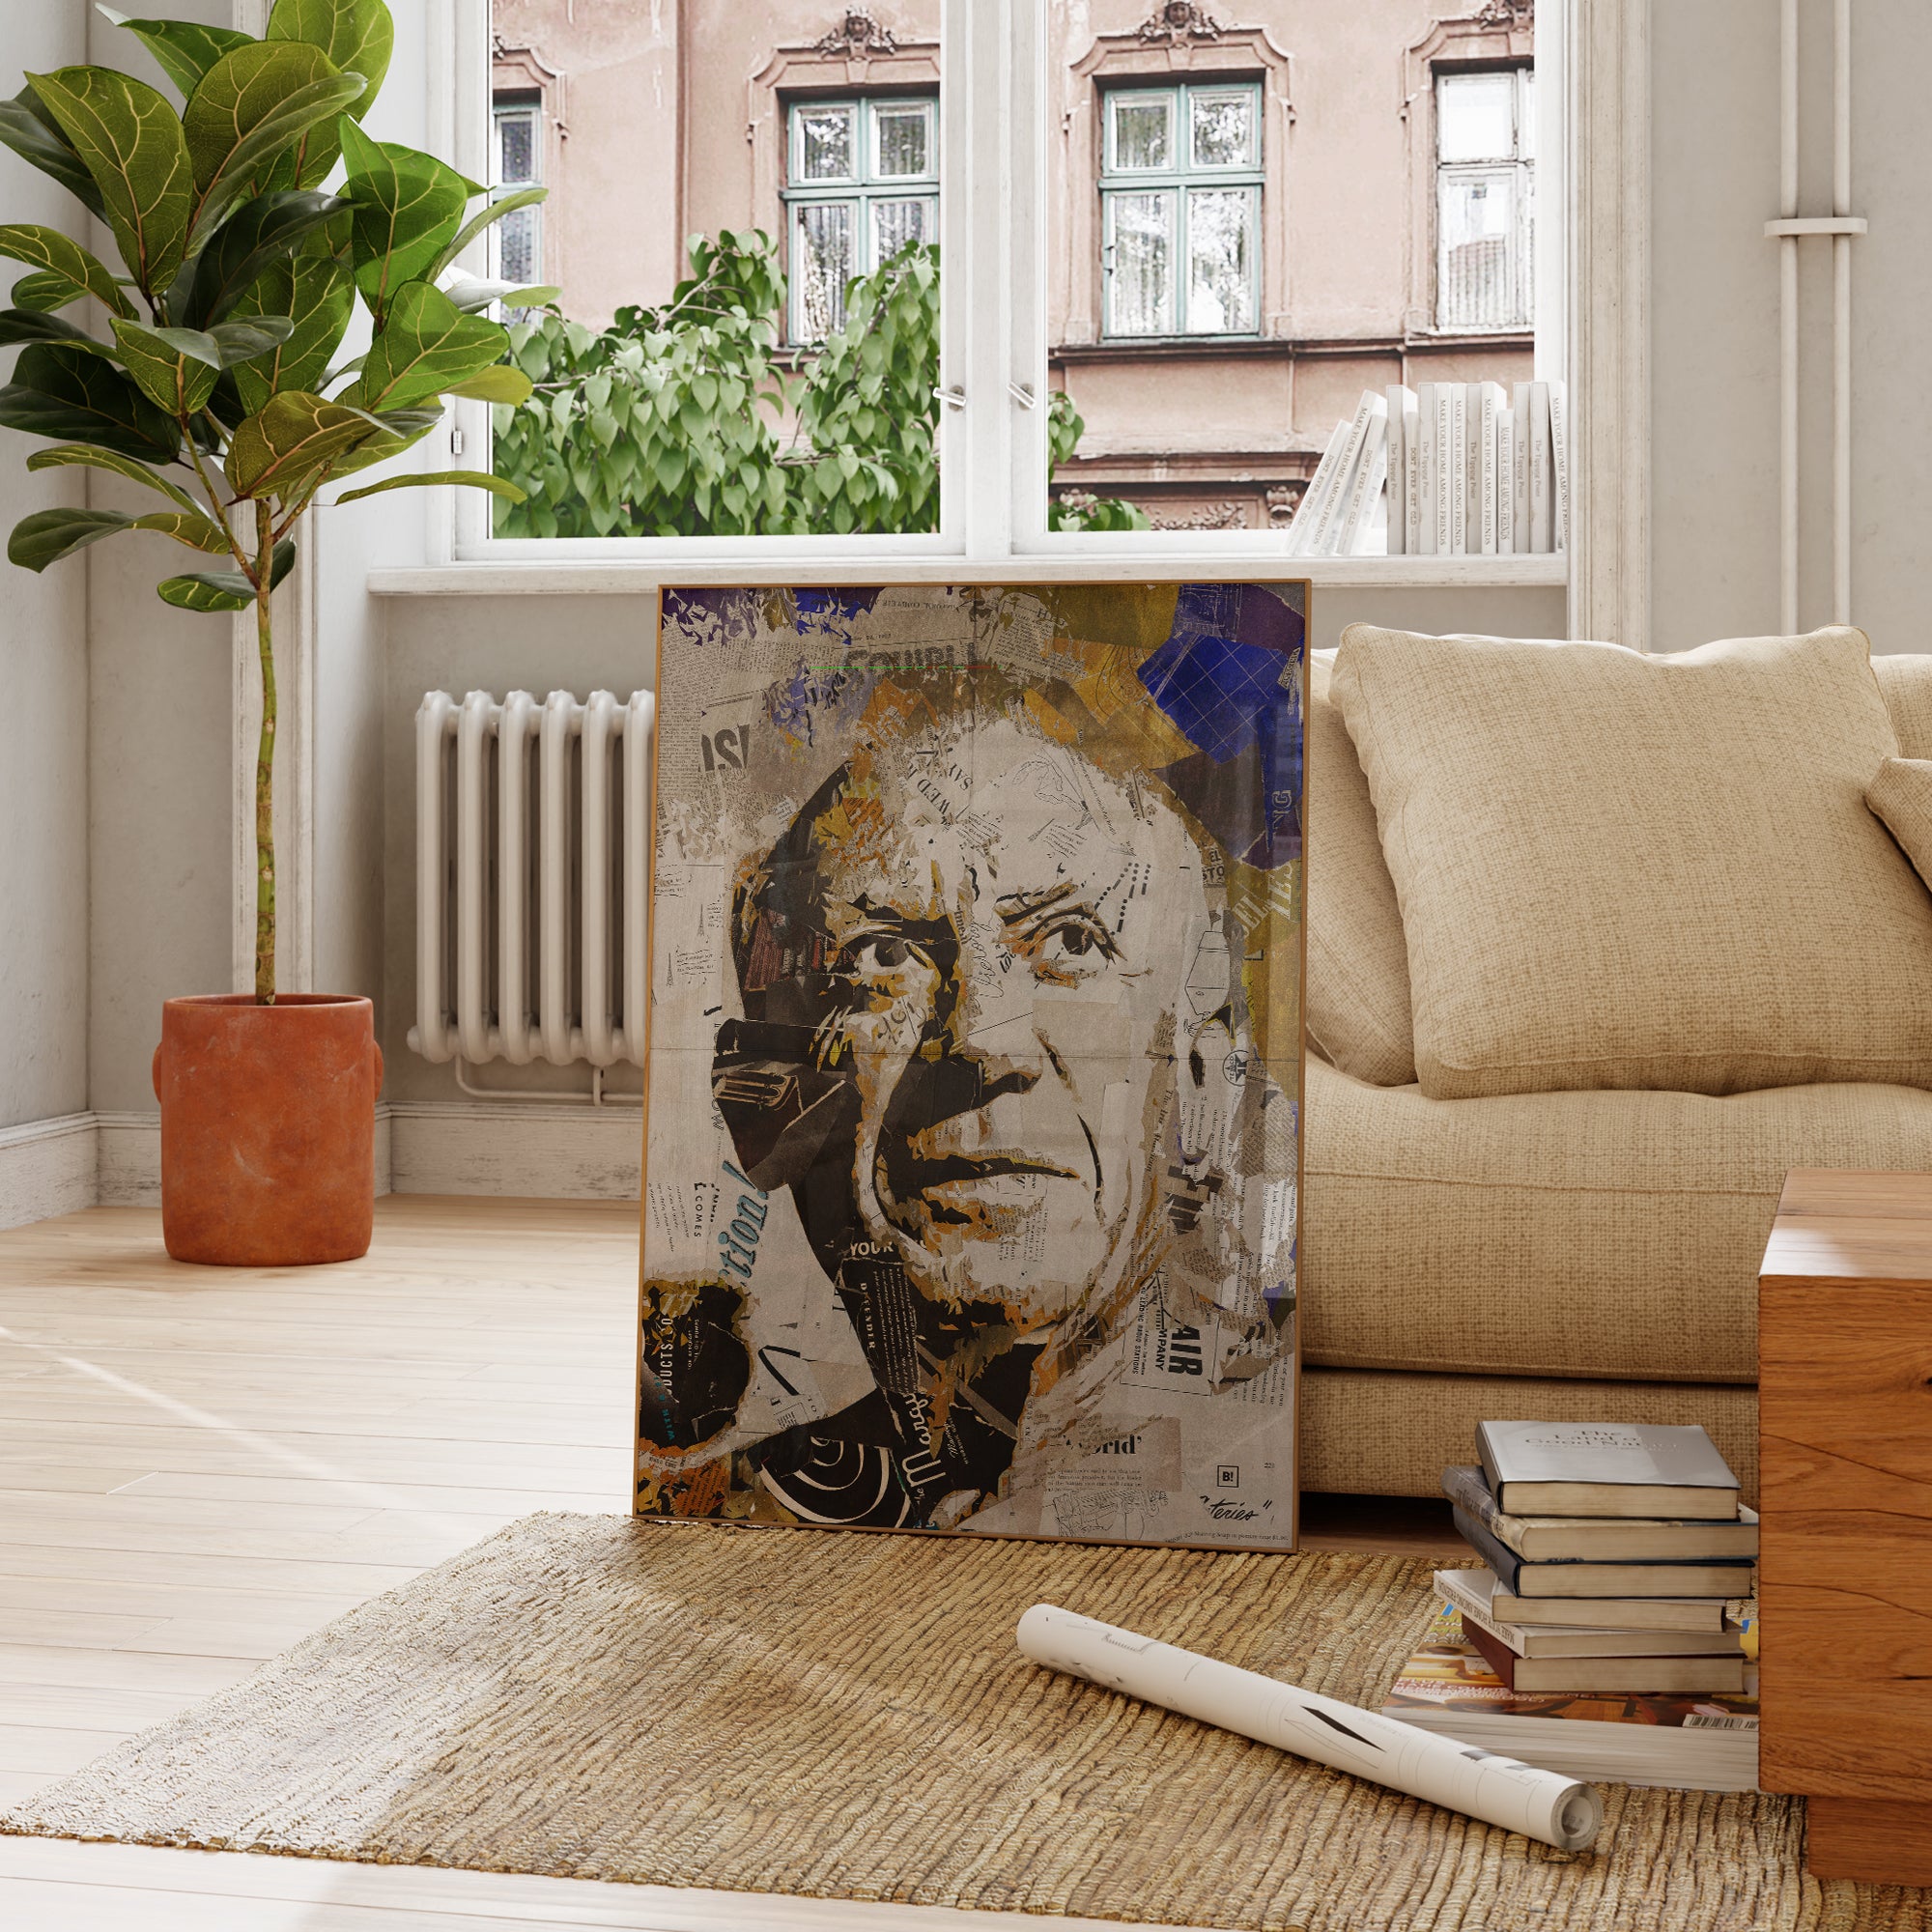 Be inspired by our iconic collage portrait art print of Pablo Picasso. This artwork was printed using the giclée process on archival acid-free paper and is presented in a French living room, capturing its timeless beauty in every detail.